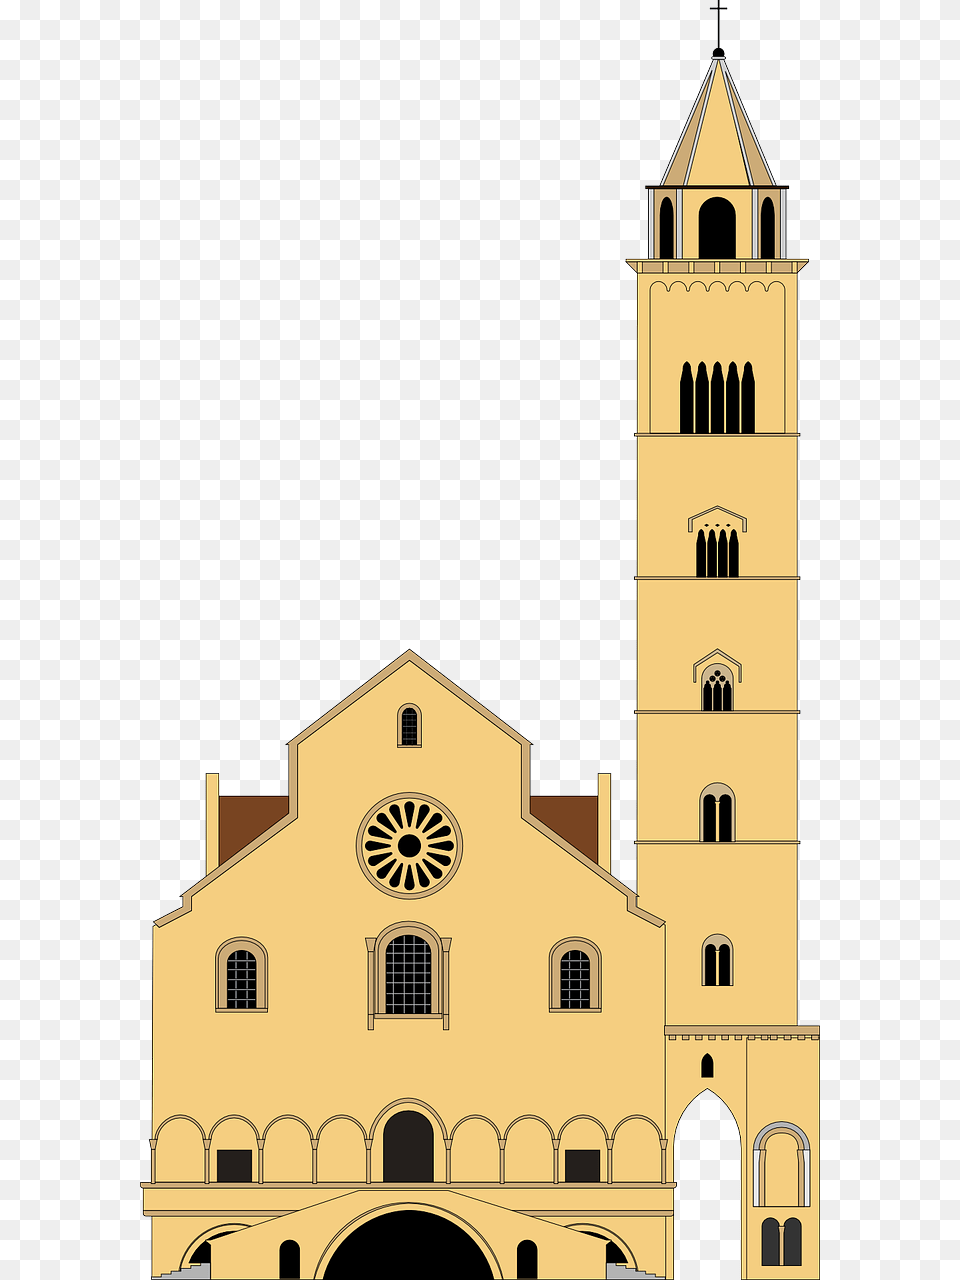 Church Architecture Building Cattedrale Di Trani Disegno, Bell Tower, Cathedral, Tower, Clock Tower Free Png Download